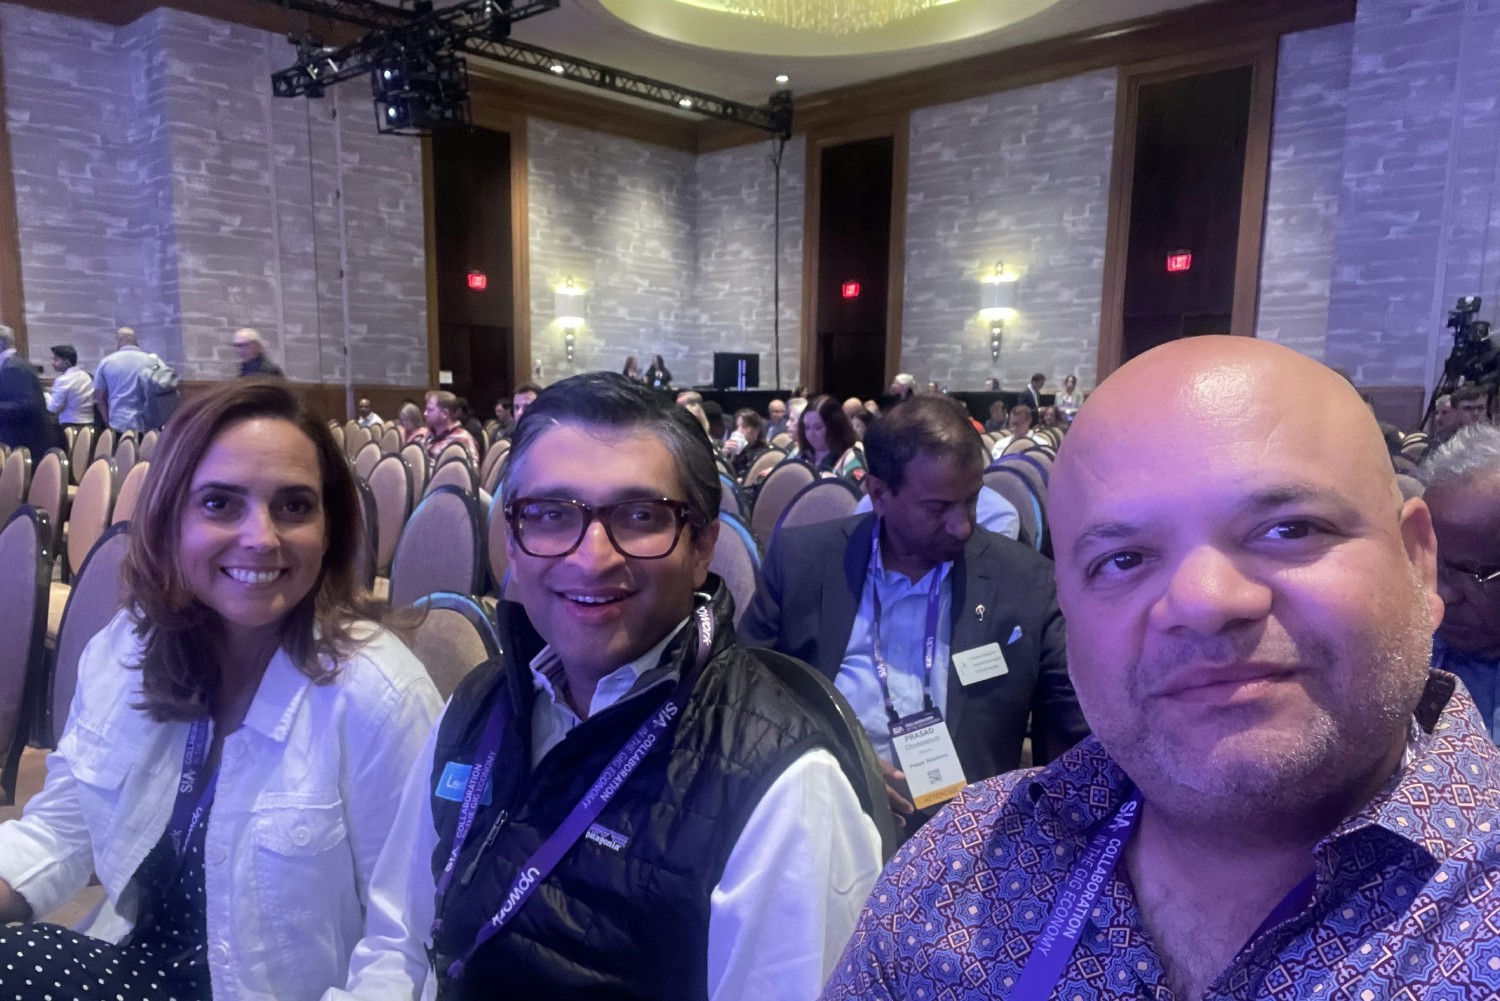 Co-Founders Kazi Ahmed & Dave Singh, attending industry conference with SVP of Sales & Strategic Accounts Delia DeVere.